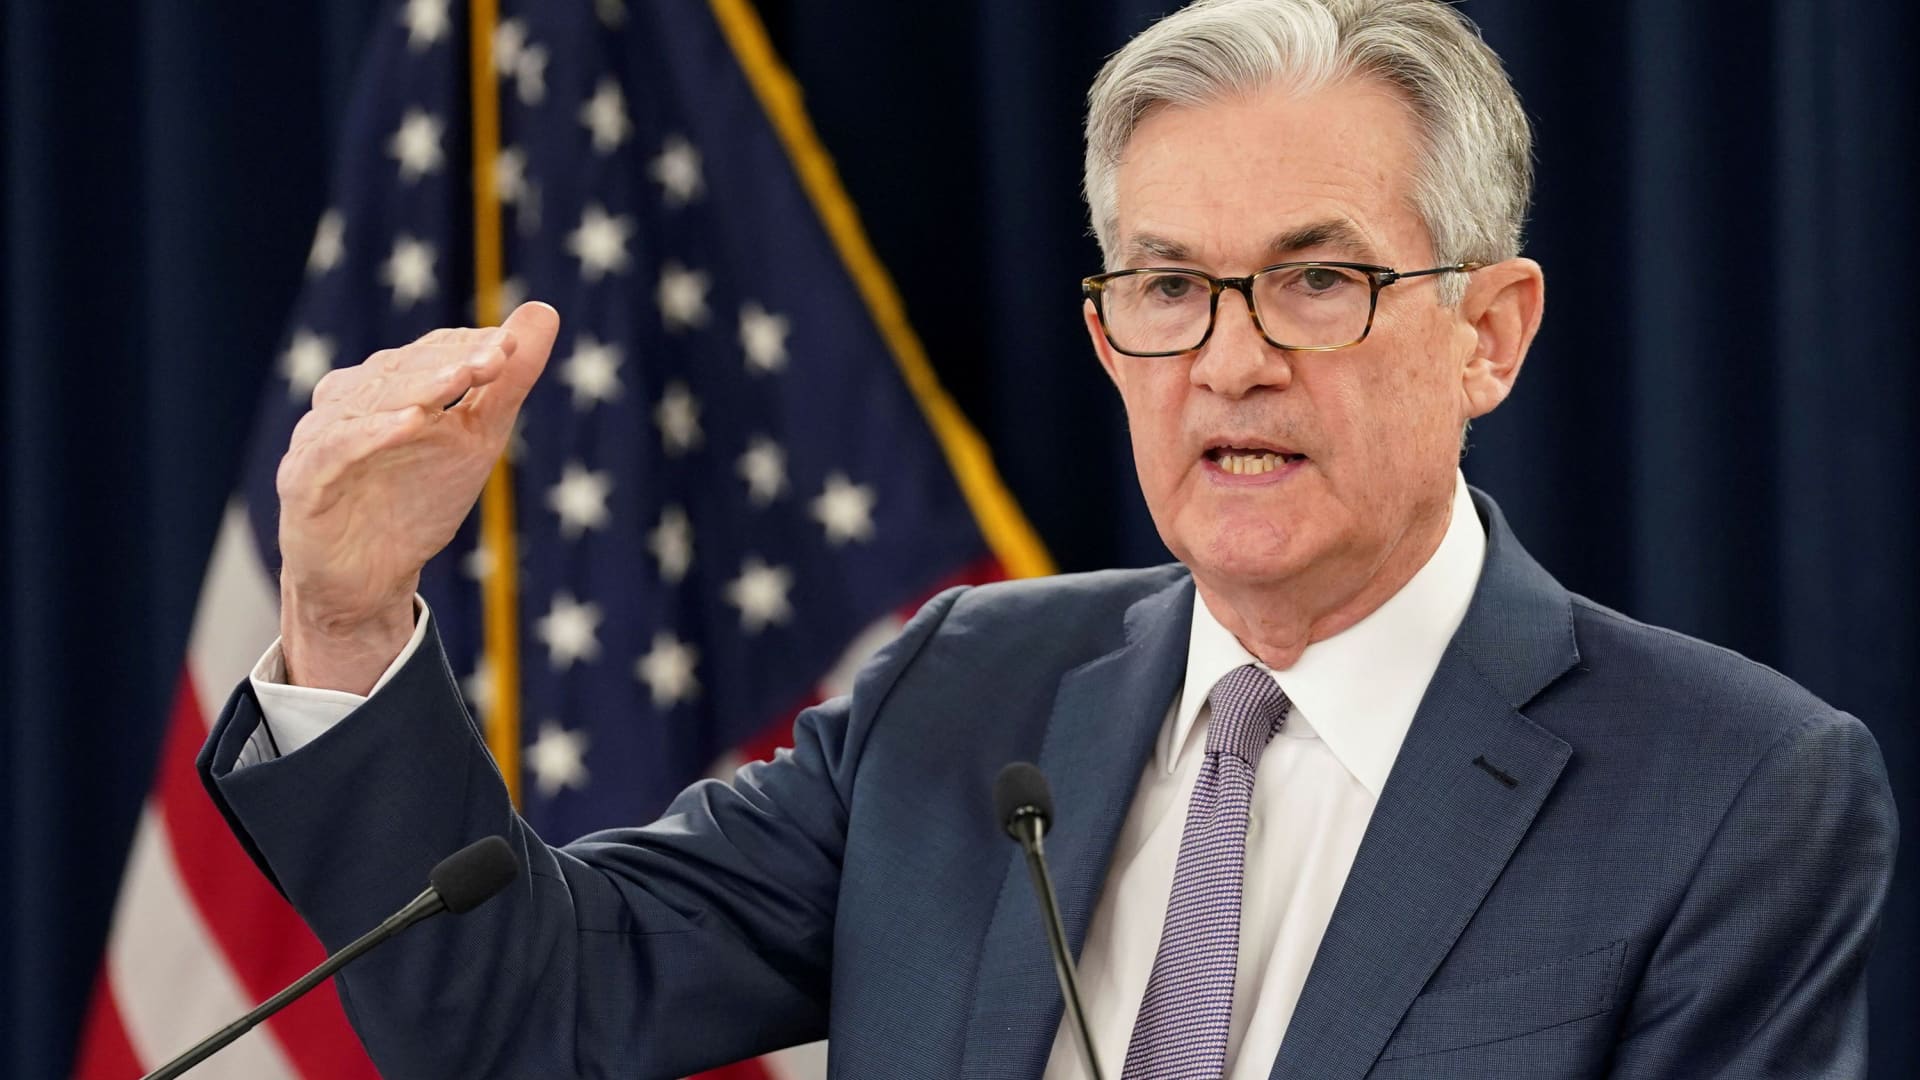 U.S. Federal Reserve Chairman Jerome Powell speaks to reporters after the Federal Reserve cut interest rates in an emergency move designed to shield the world's largest economy from the impact of the coronavirus, during a news conference in Washington, March 3, 2020.